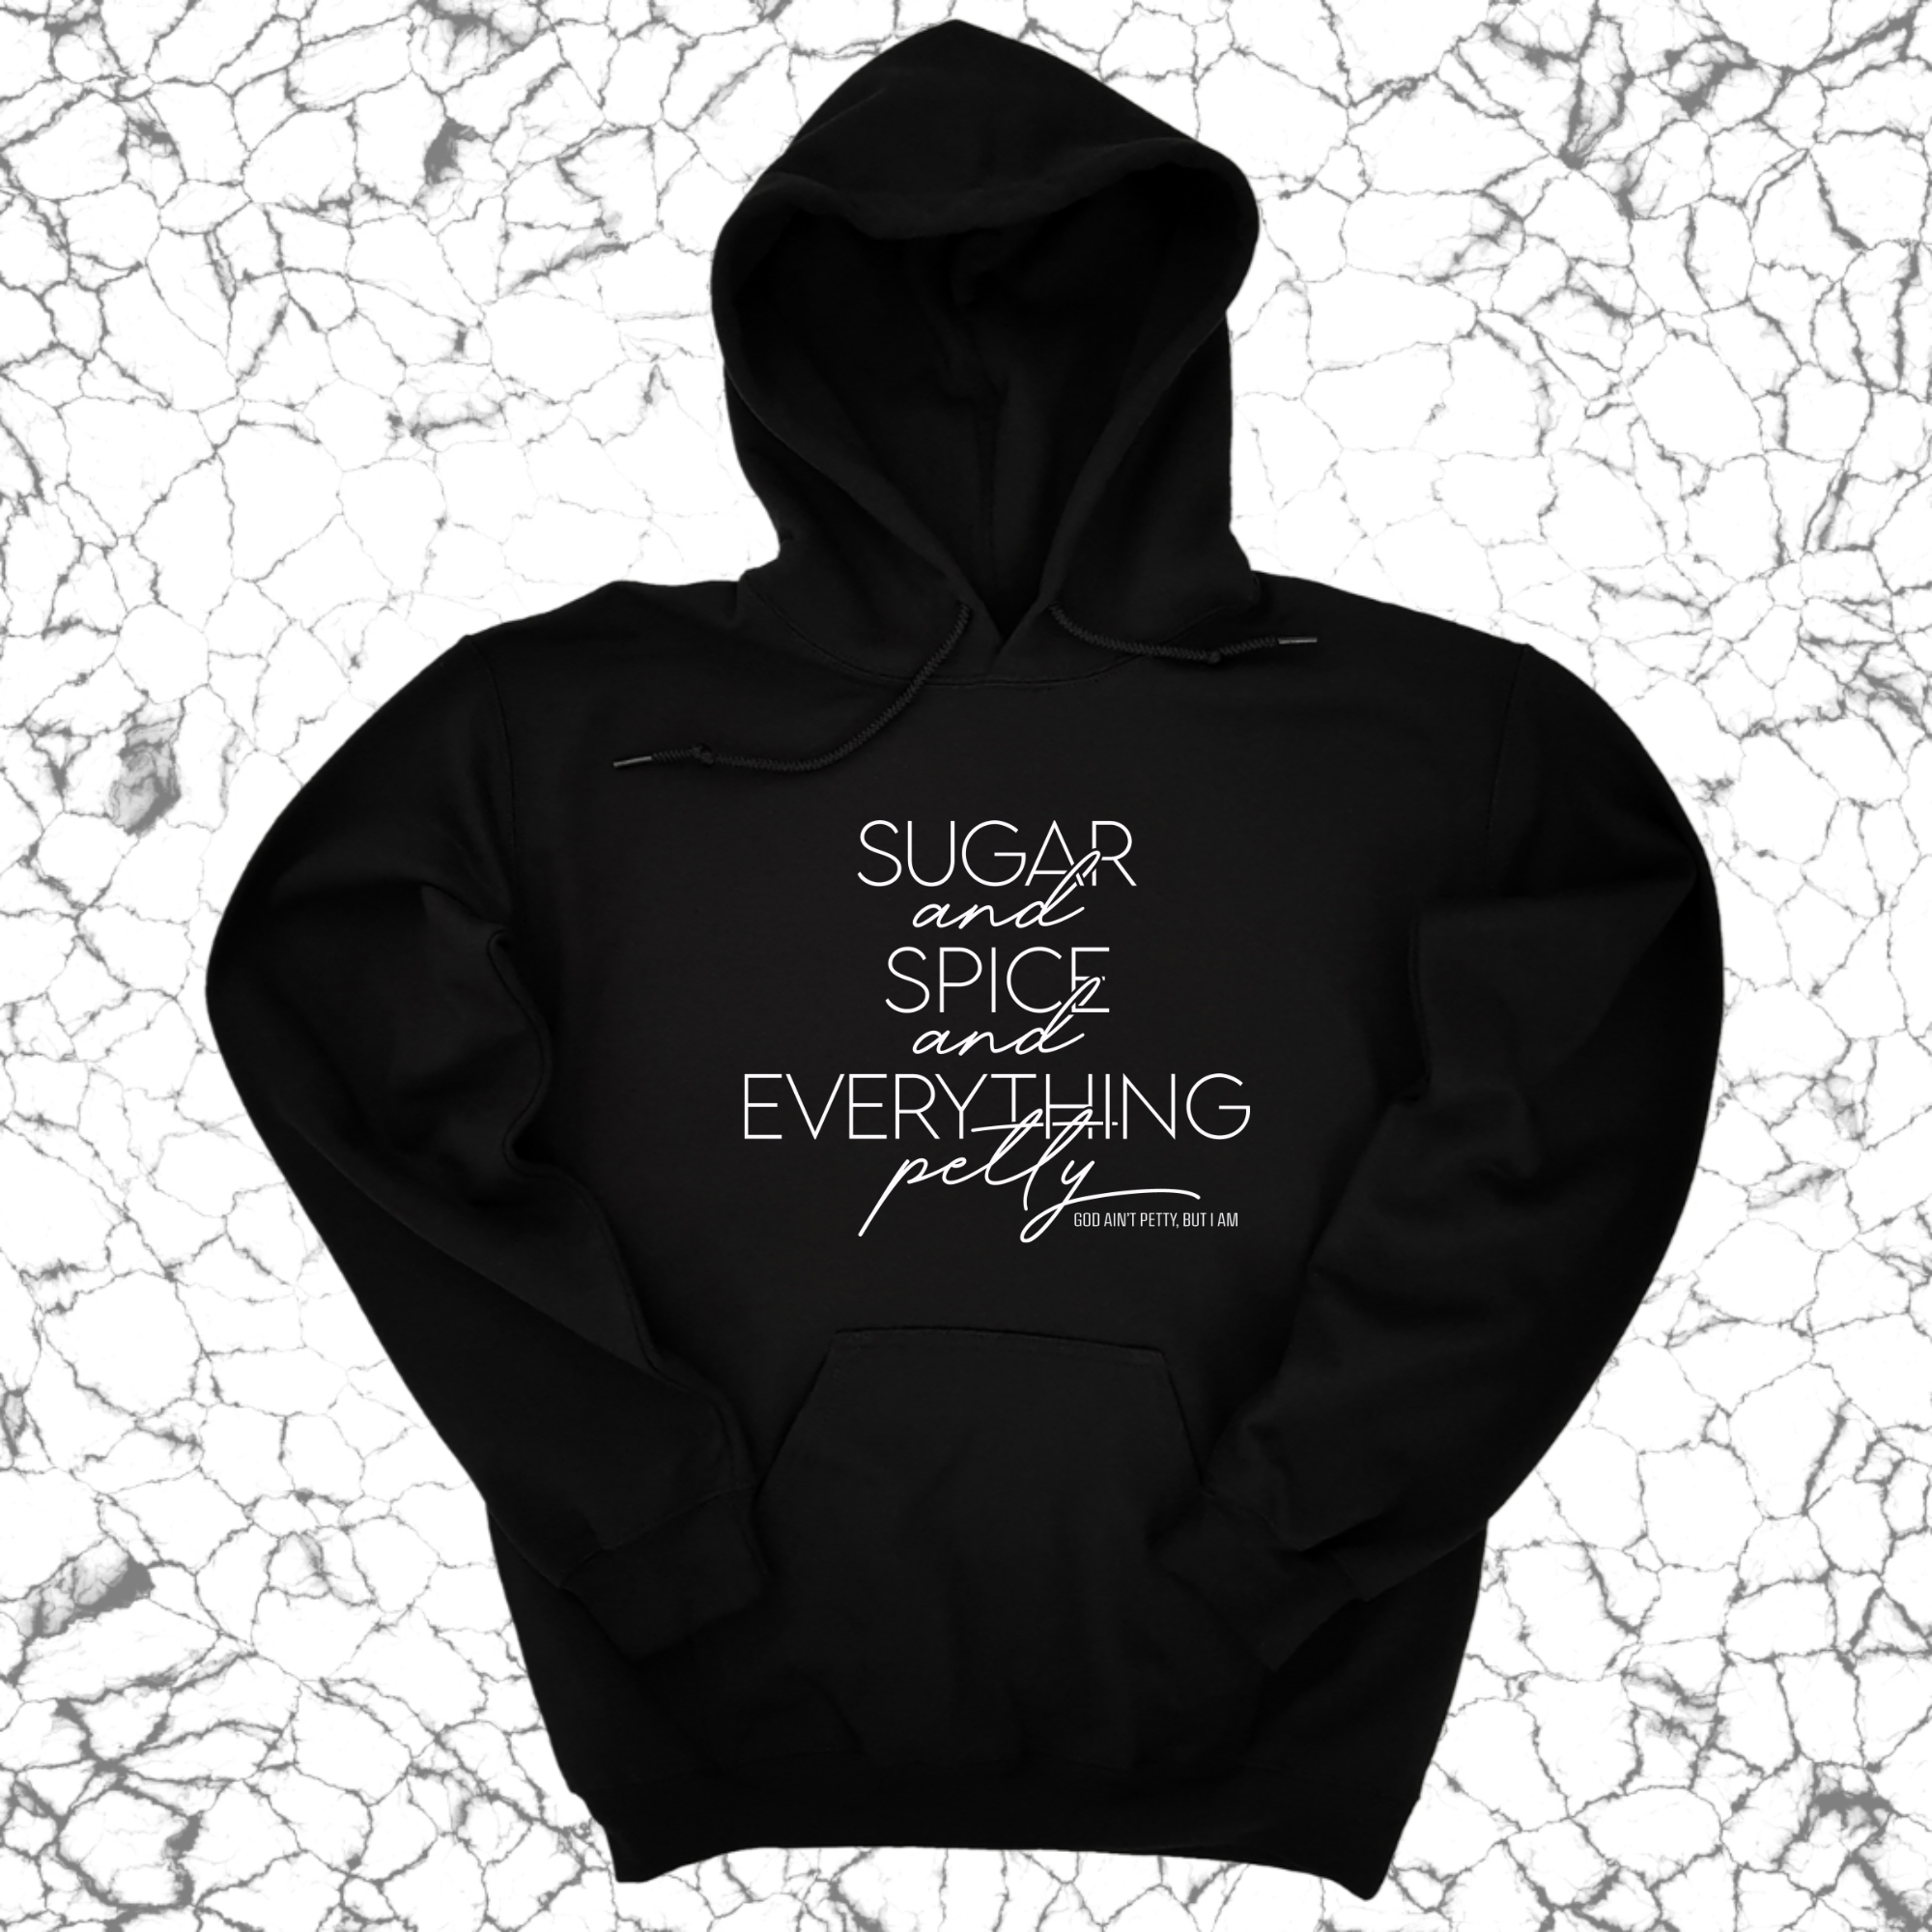 Sugar and Spice and Everything petty Unisex Hoodie-Hoodie-The Original God Ain't Petty But I Am